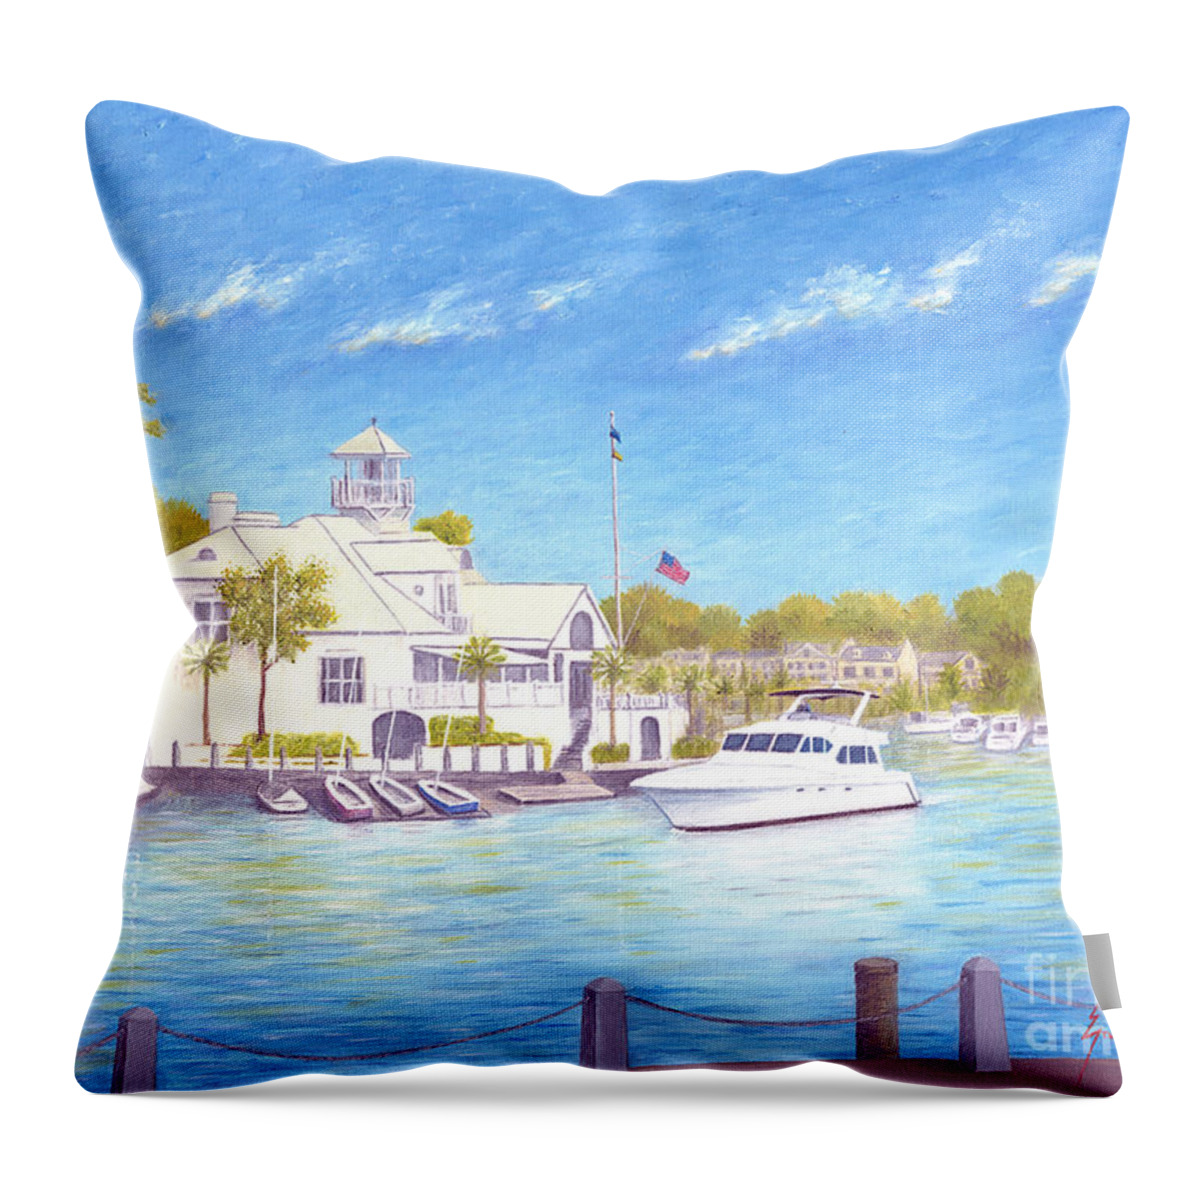 Hilton Head Island Throw Pillow featuring the painting Yacht at Hilton Head Island by Jerome Stumphauzer